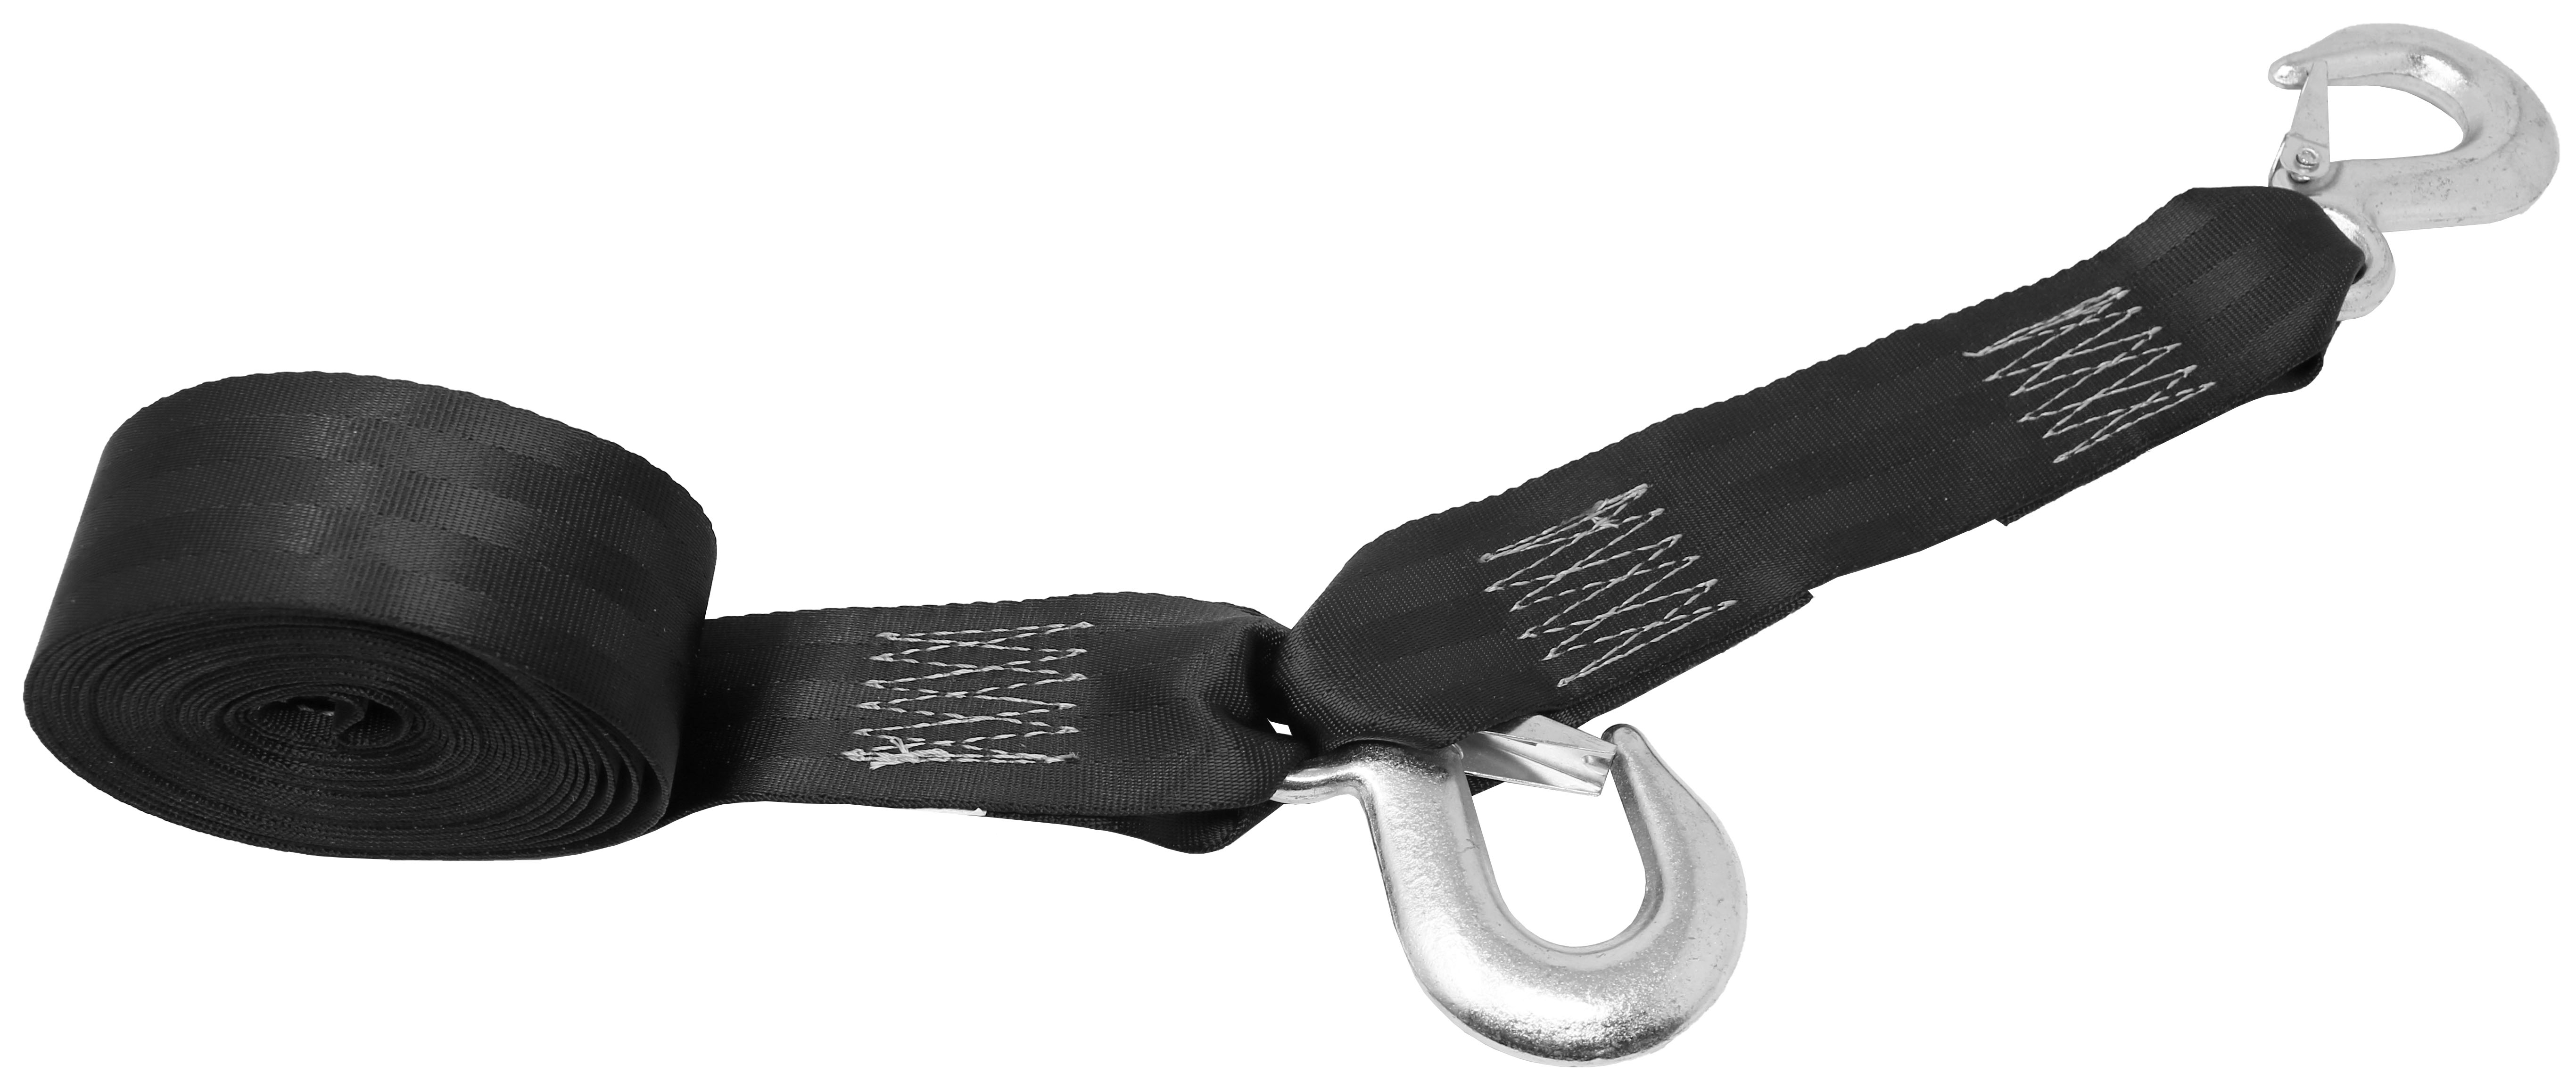 CustomTieDowns 2 Inch x 20 Foot Black Winch Strap With A Forged Snap Hook.  10 Inch Safety Strap With A Snap Hook. 1 Inch Loop For Attachment To Winch. - image 1 of 3